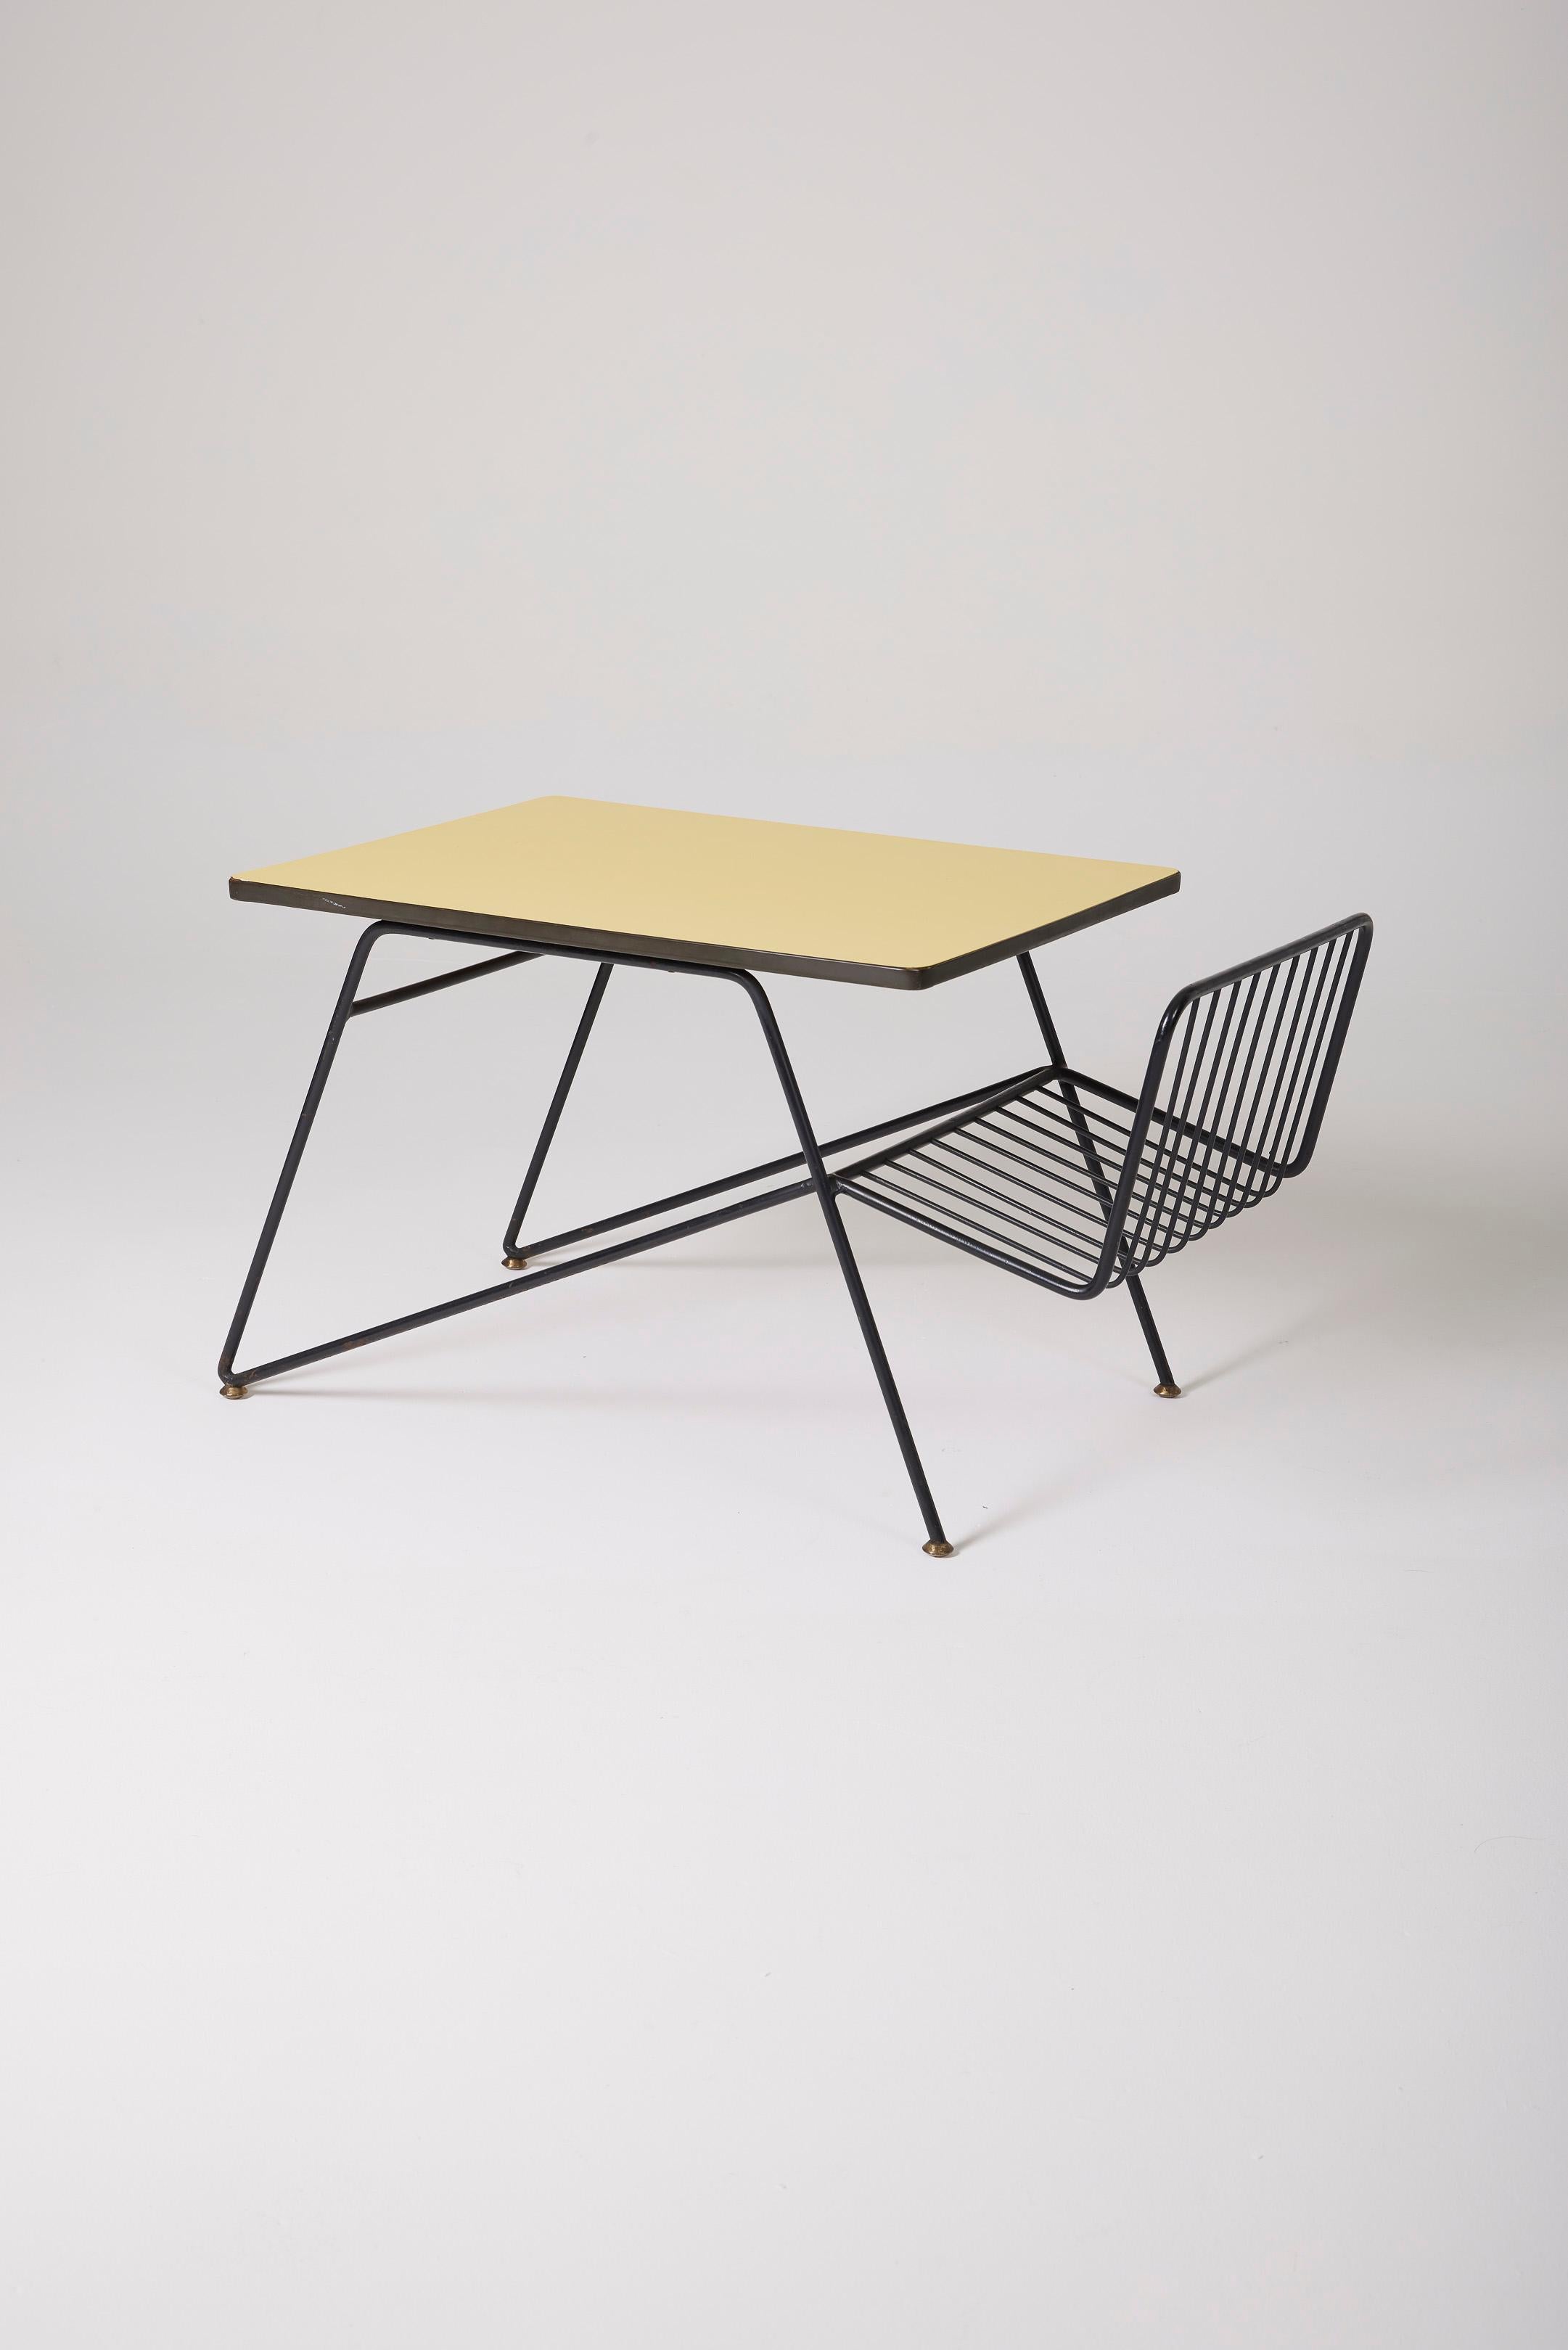 Coffee table by Italian designer Gastone Rinaldi (1920-2006) featuring a yellow Formica tabletop and a black tubular structure in the style of the 1950s. Includes a document holder on the side, making this coffee table a functional piece of